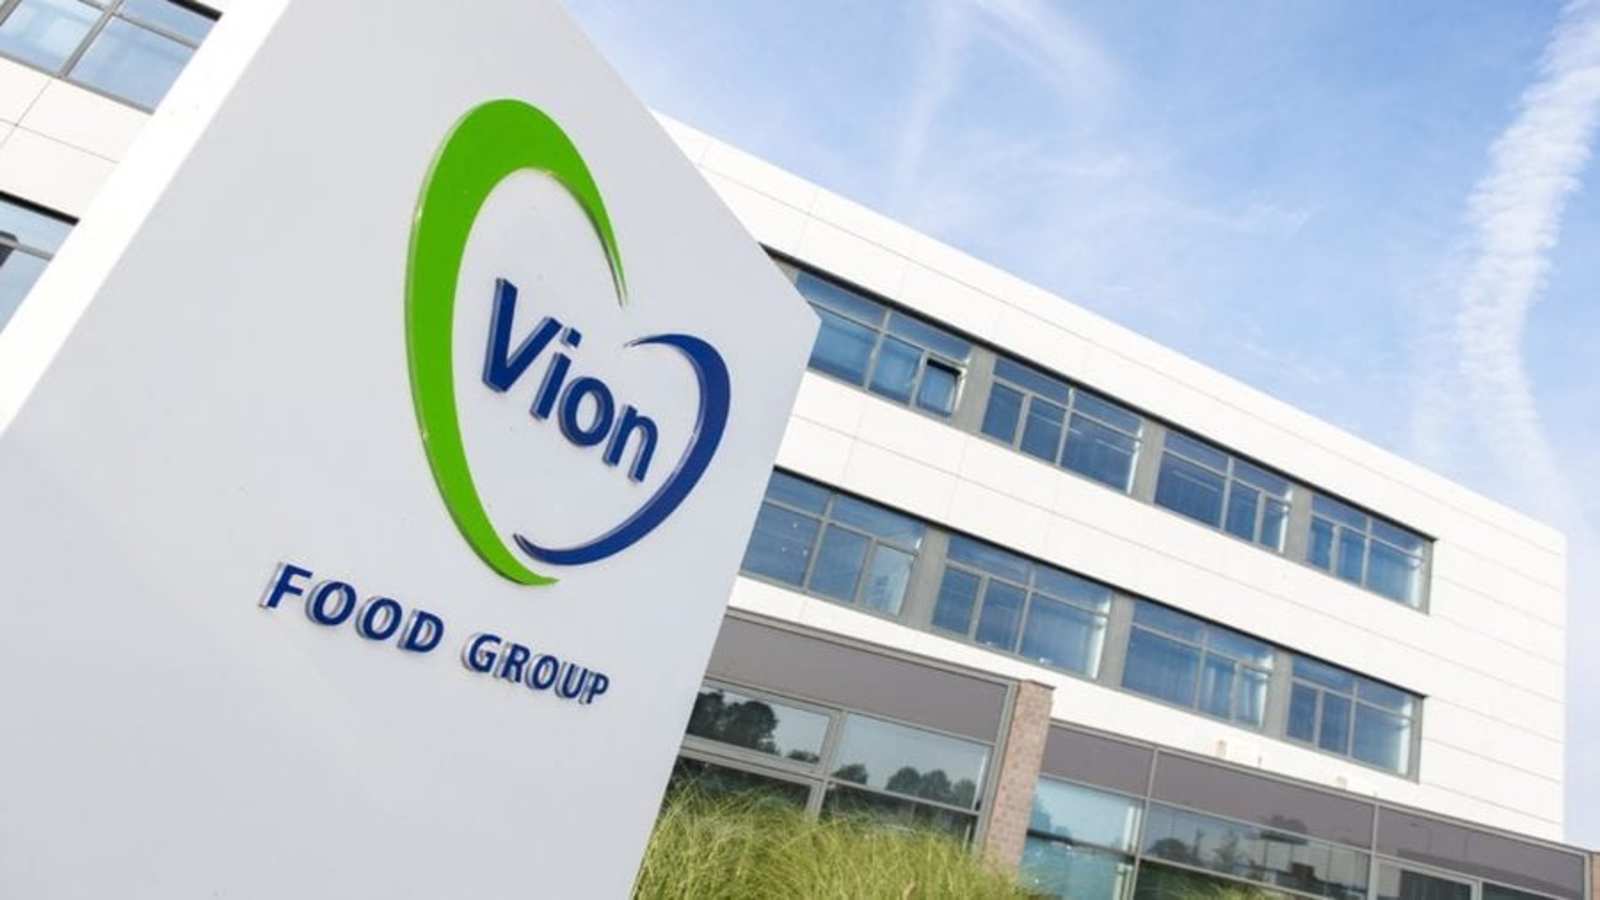 Dutch Food company Vion to acquire Adriaens to bolster position in Belgium’s meat industry